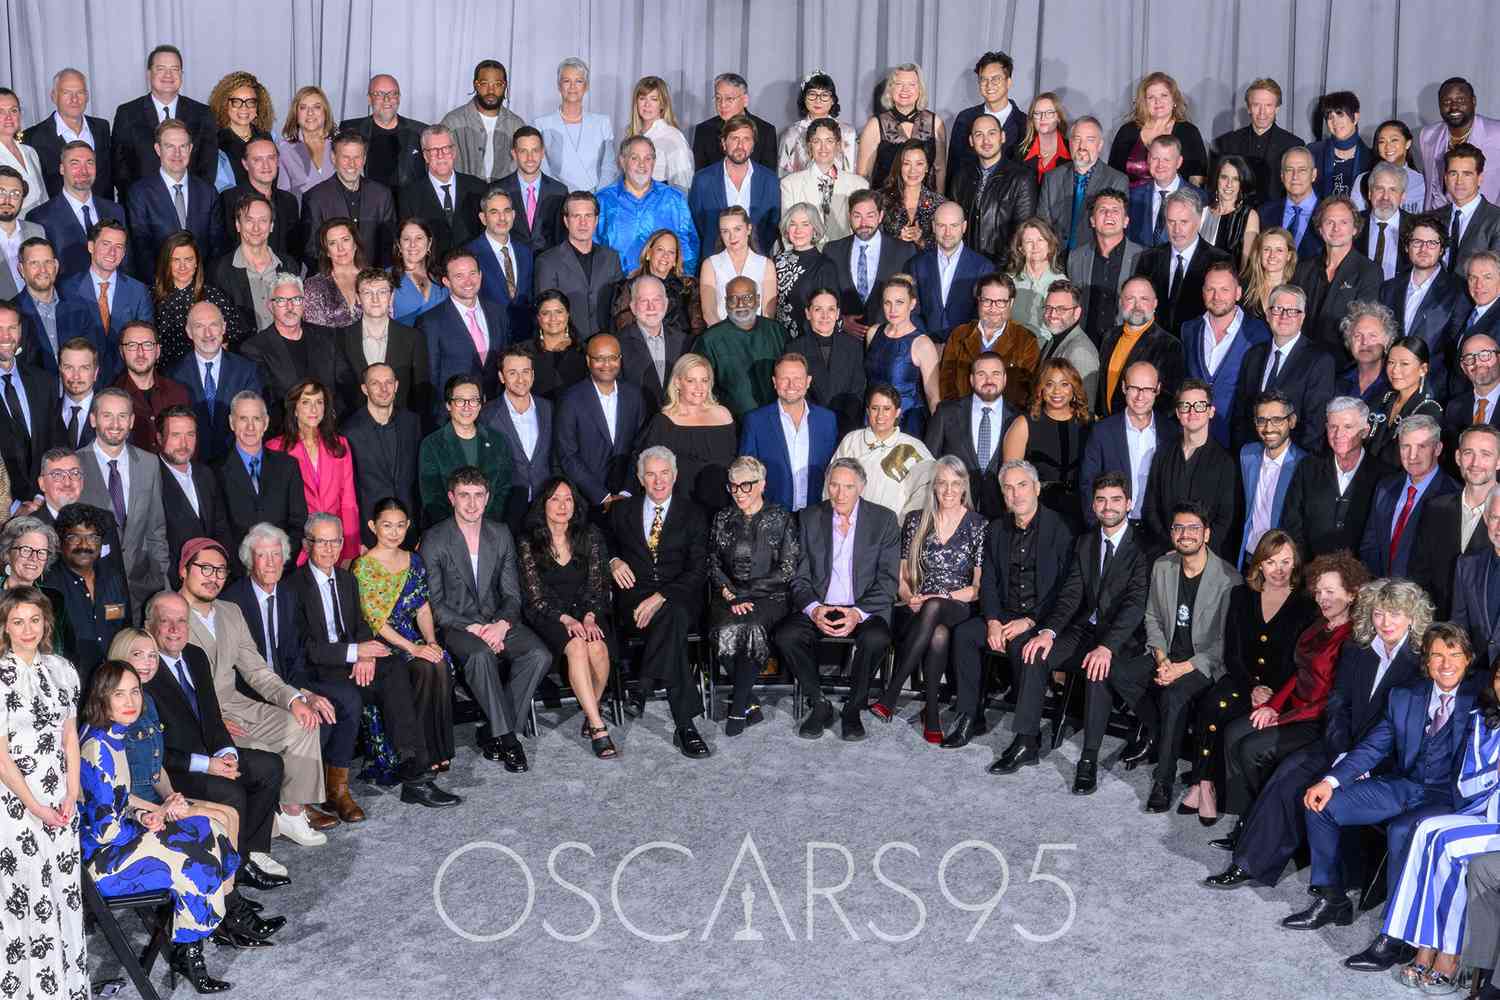 The 95th Oscars will be hosted on March 12 at the Dolby Theatre in Hollywood